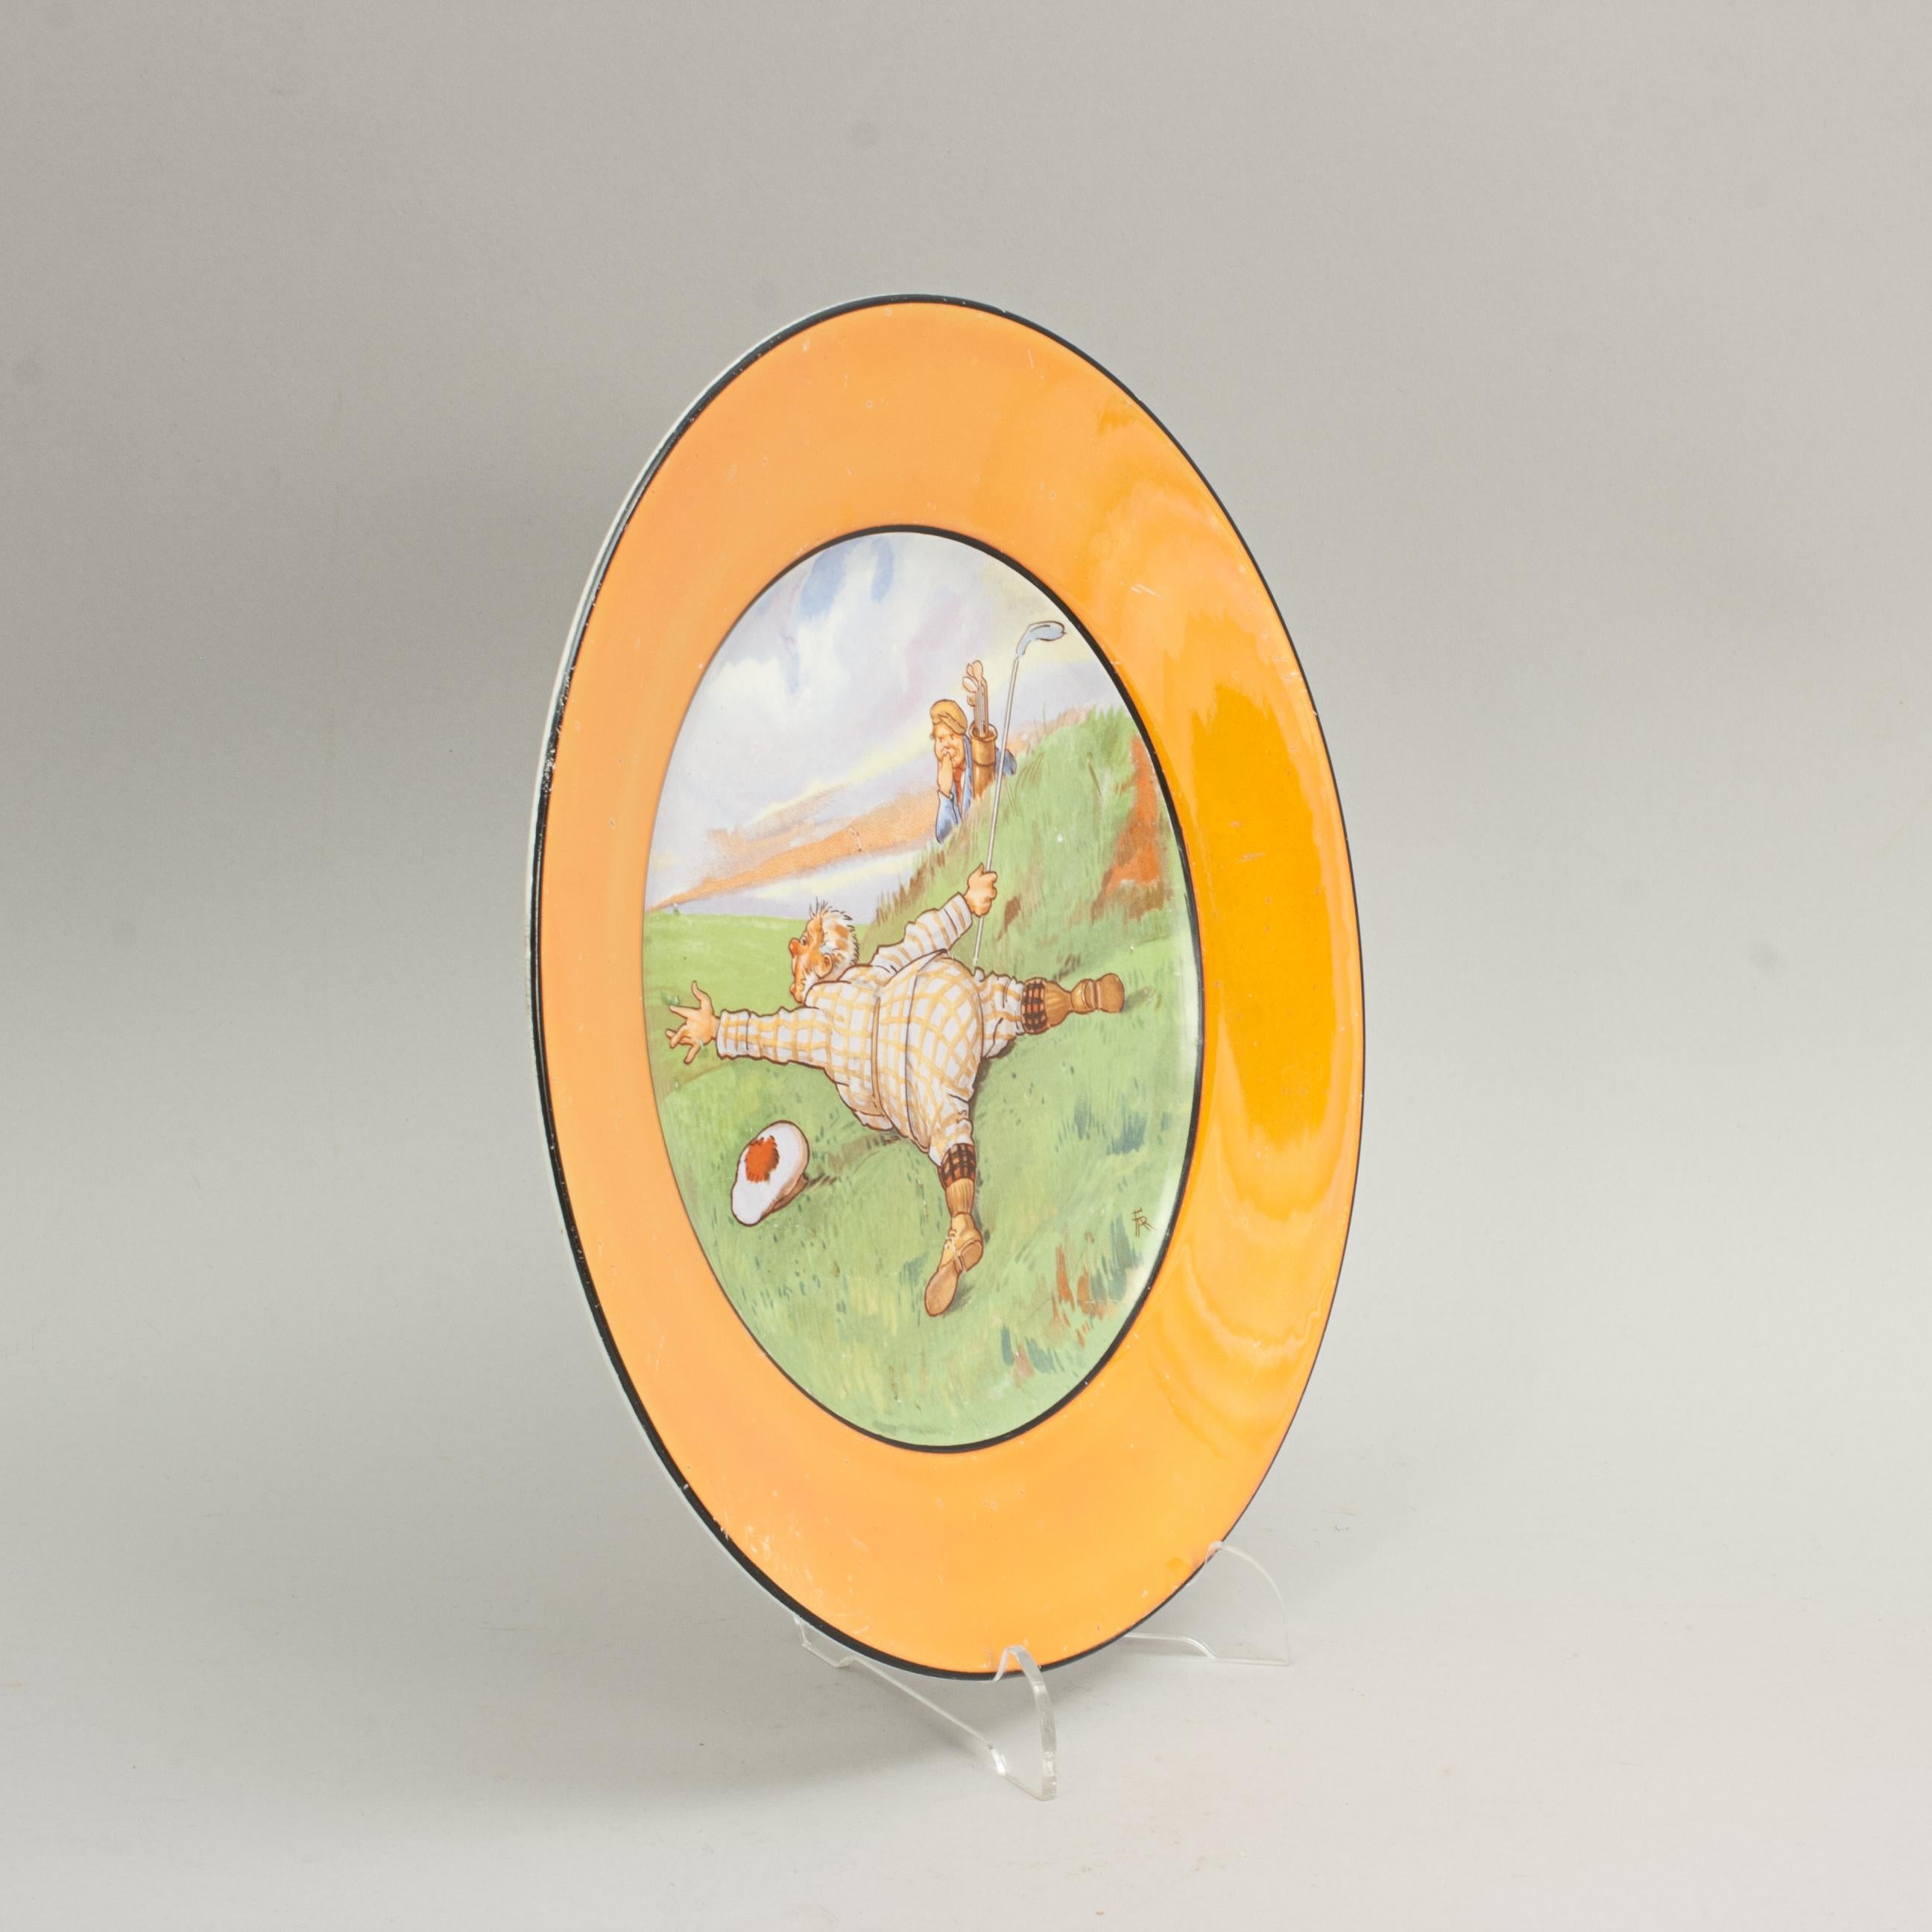 Winton Pottery With Golf Design.
A Wonderful Golf Plate by Royal Winton, Stoke on Trent pottery, with the printed mark to the rear. The transfer decoration is showing a golf scene with artist's monogram (F A R) and is known as 